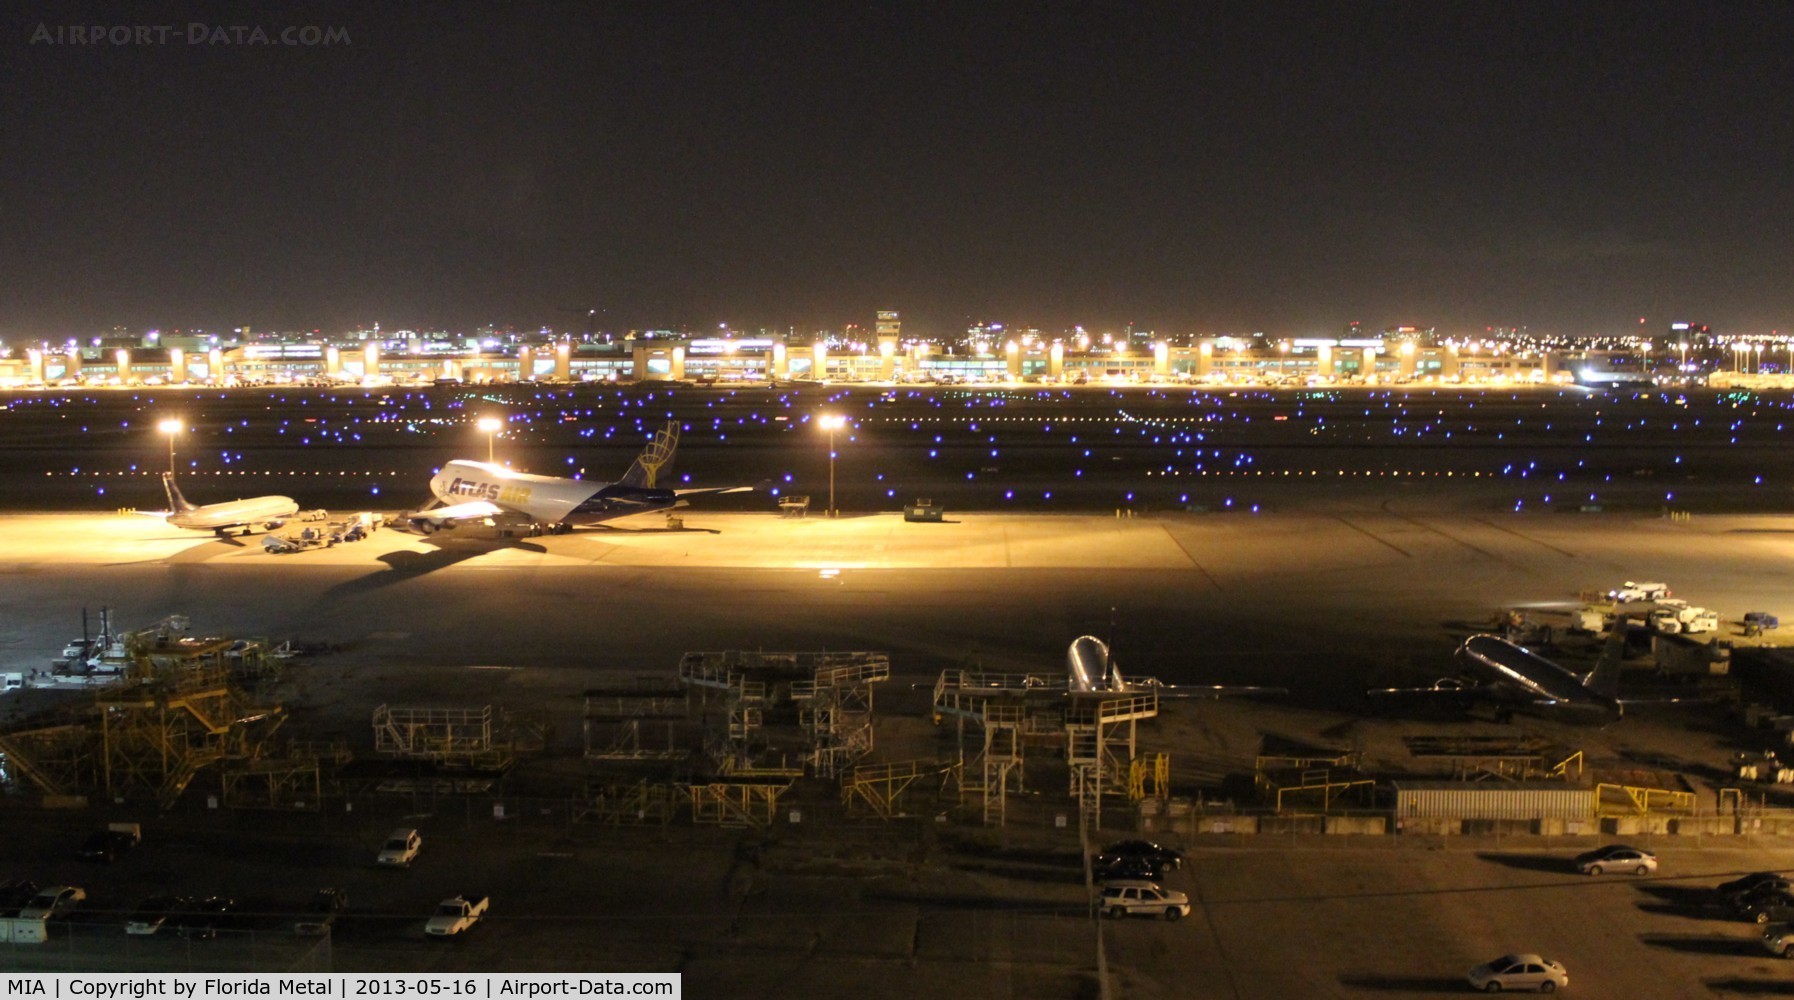 Miami International Airport (MIA) - Night view of Miami Airport from Comfort Inn overlooking the maintenance areas